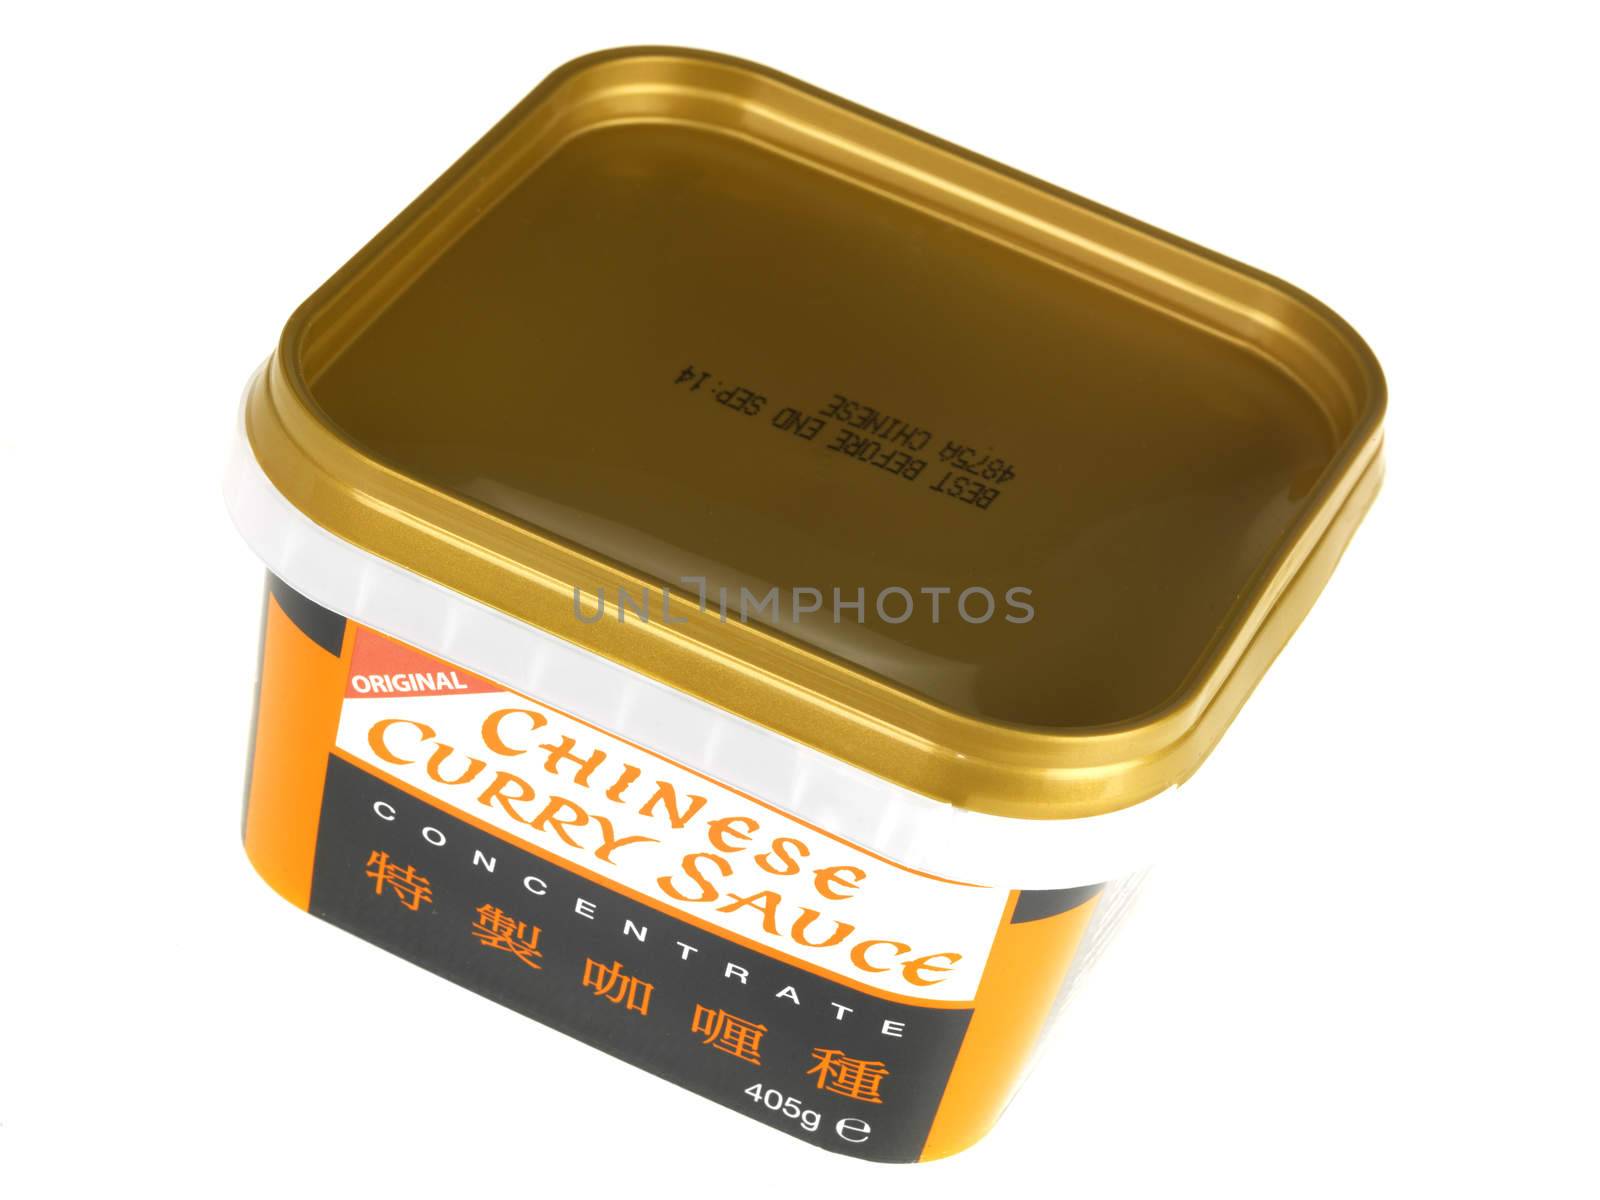 Chinese Curry Paste by Whiteboxmedia